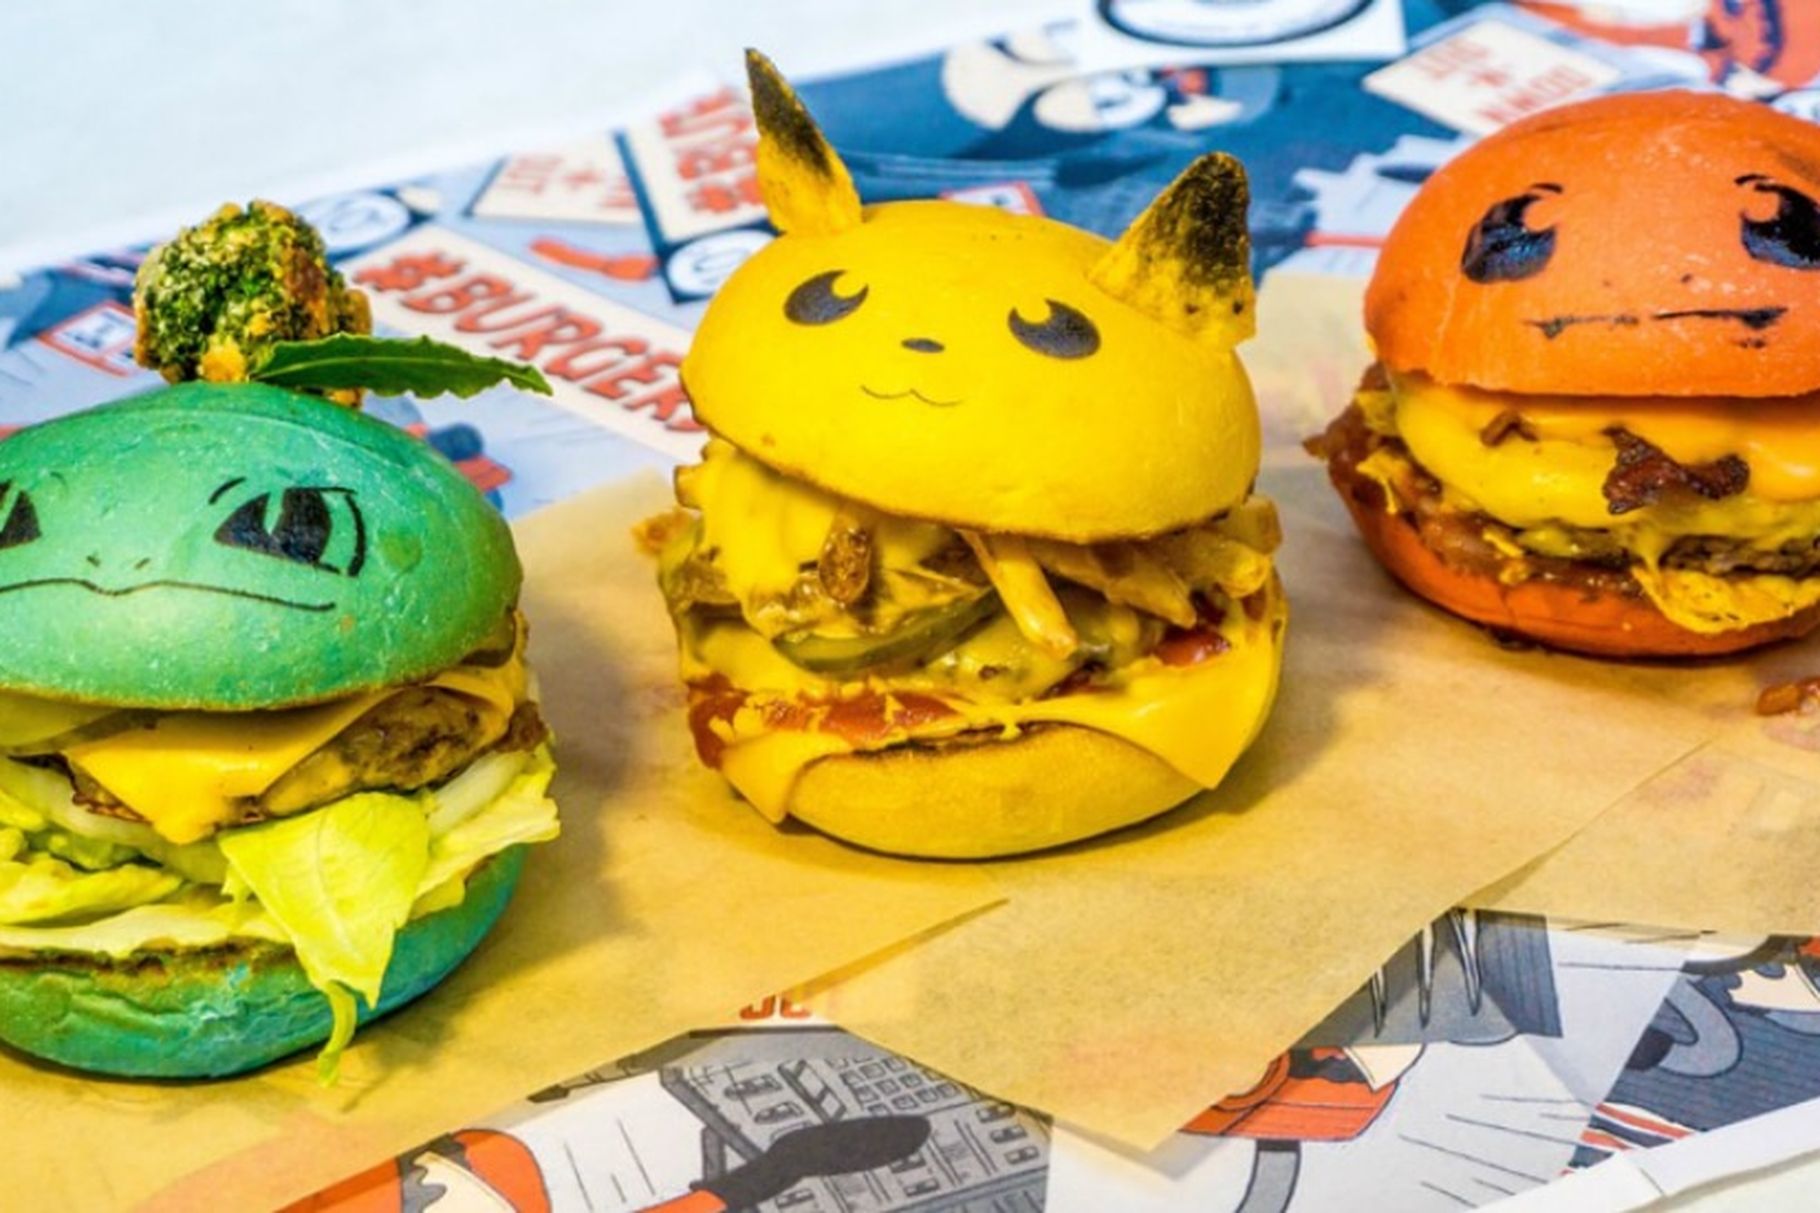 A photo of three burgers with buns that have been dyed green, yellow and orange and drawn-on and attached features, including eyes and ears, that make them look like Pokémon